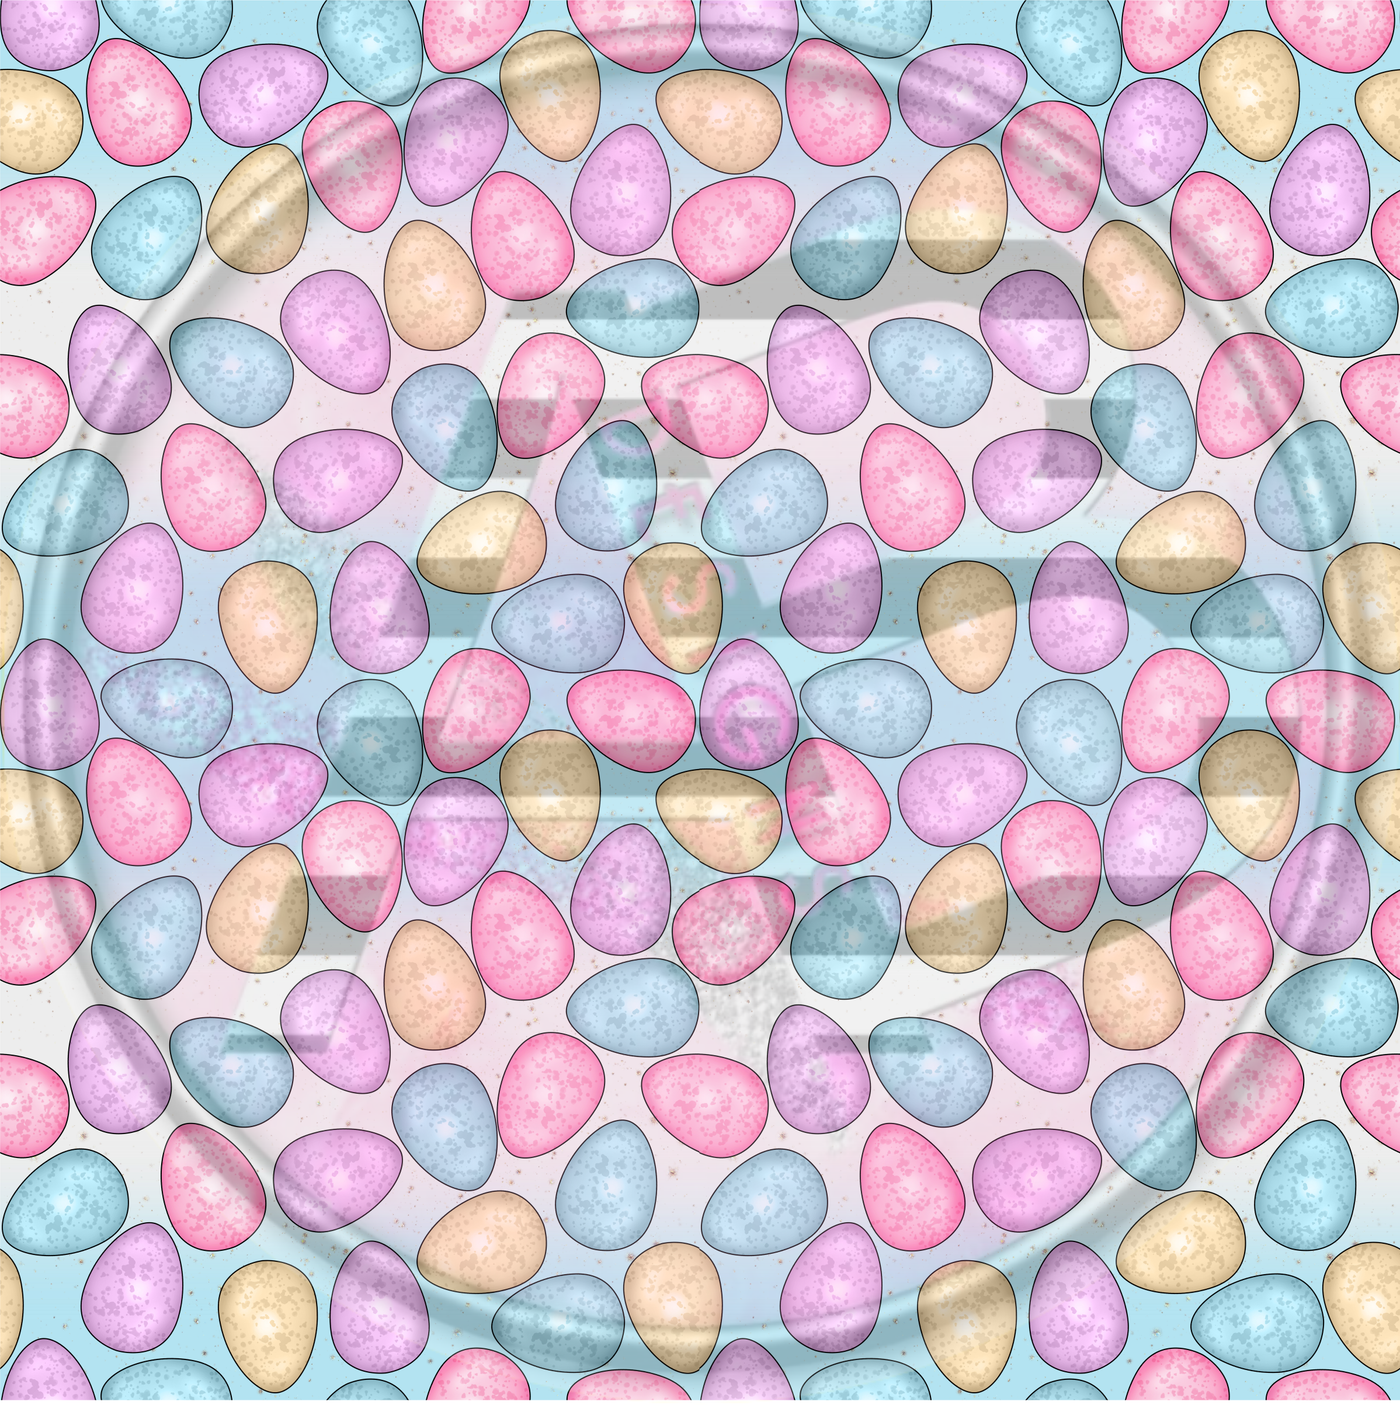 Adhesive Patterned Vinyl - Easter 29 SMALLER